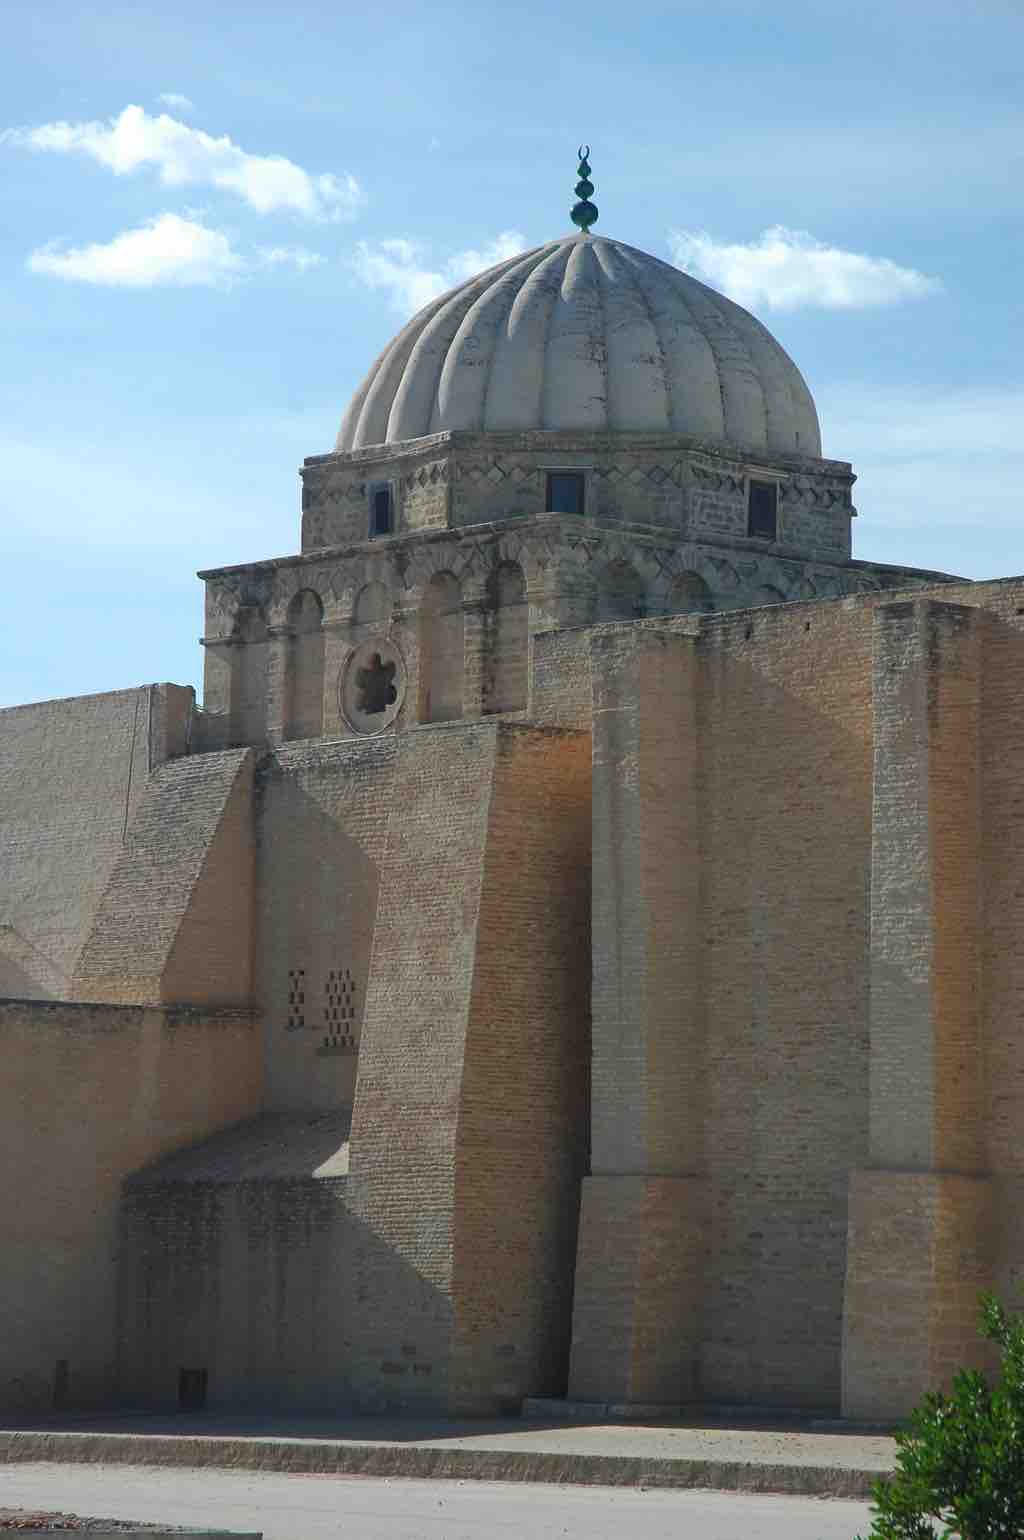 Dome of the mihrab (9th century) in the Great Mosque of Kairouan, also known as the Mosque of Uqba, in Kairouan, Tunisia